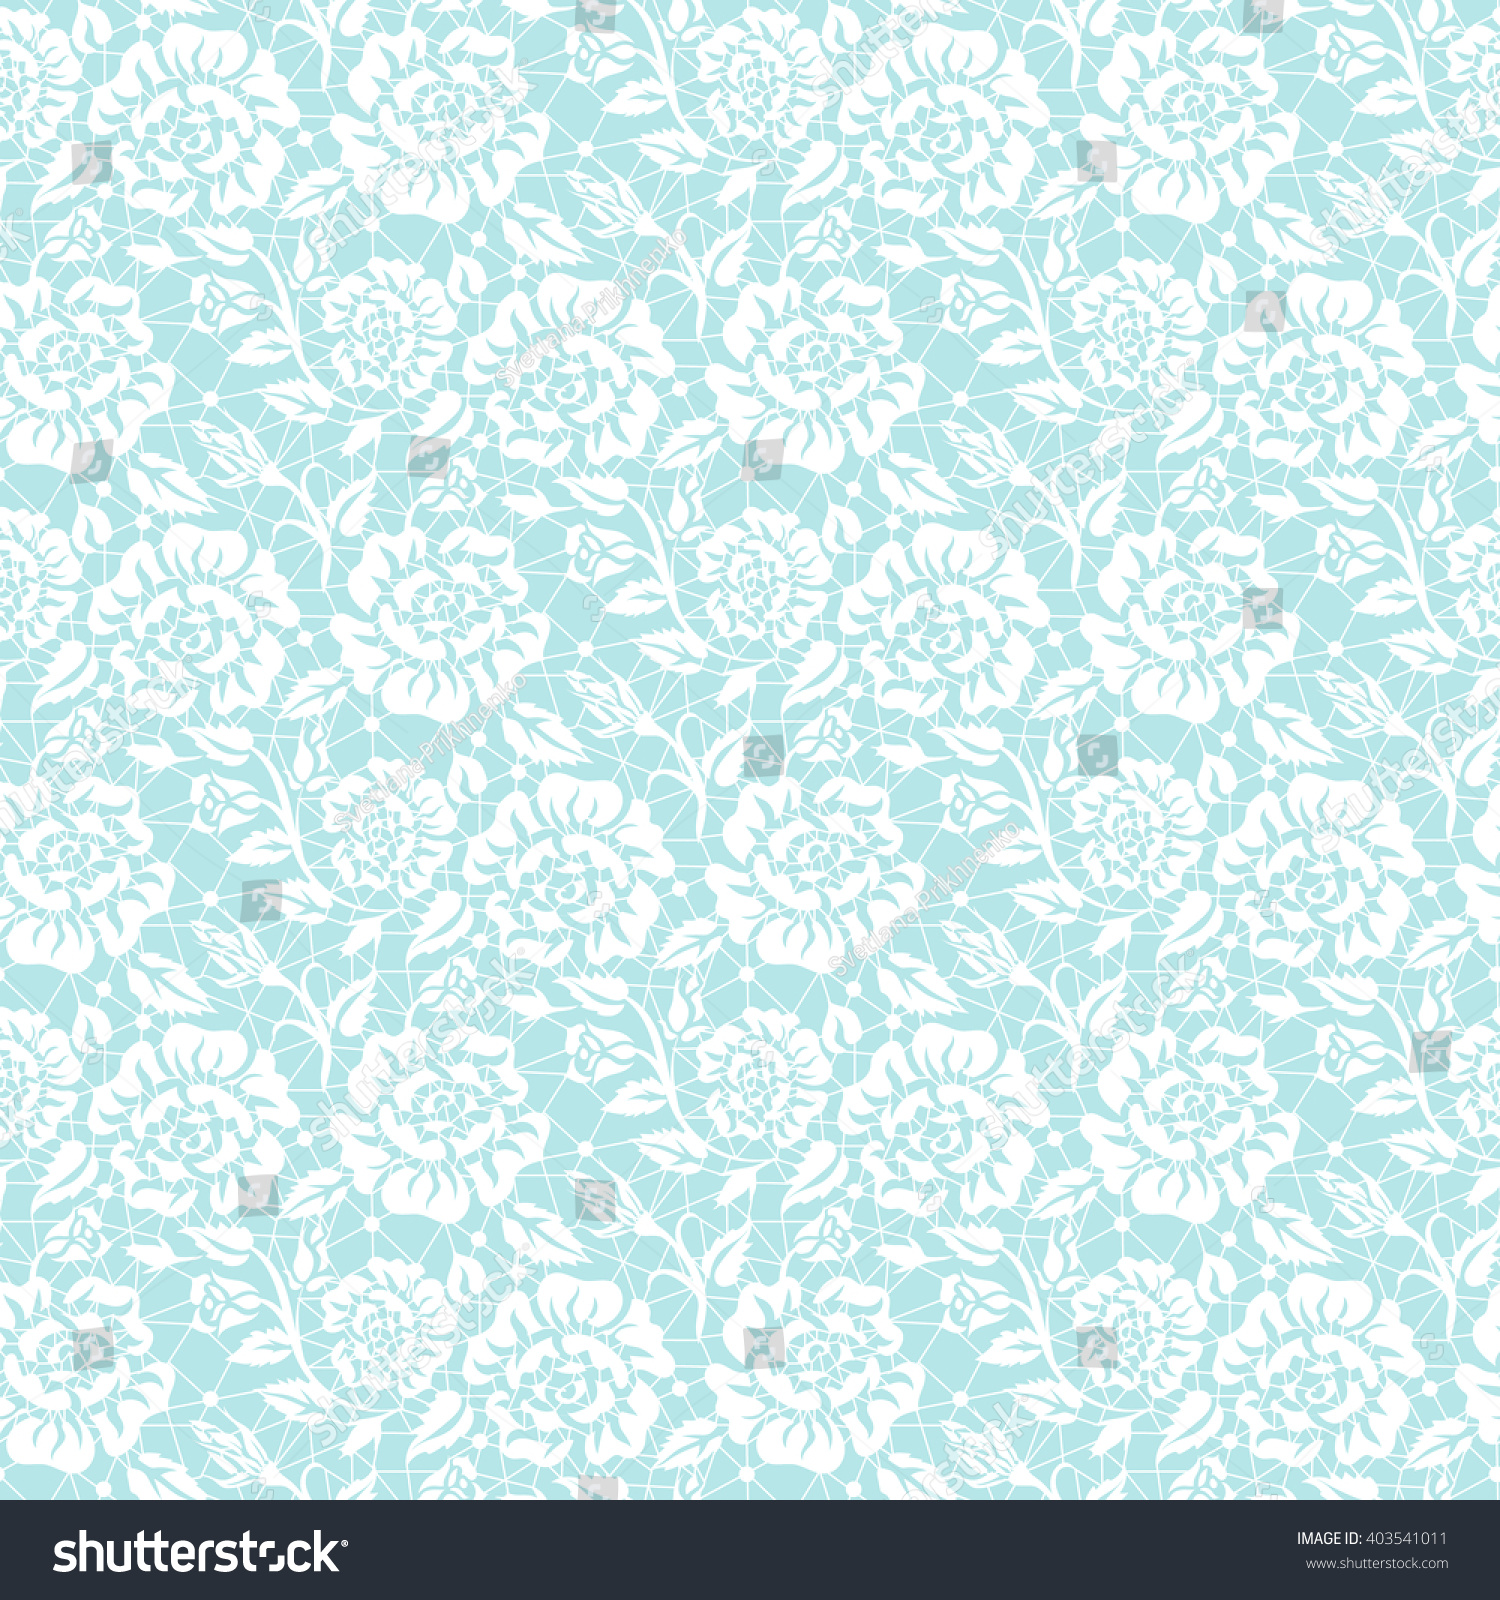 Seamless white lace background with floral pattern #403541011